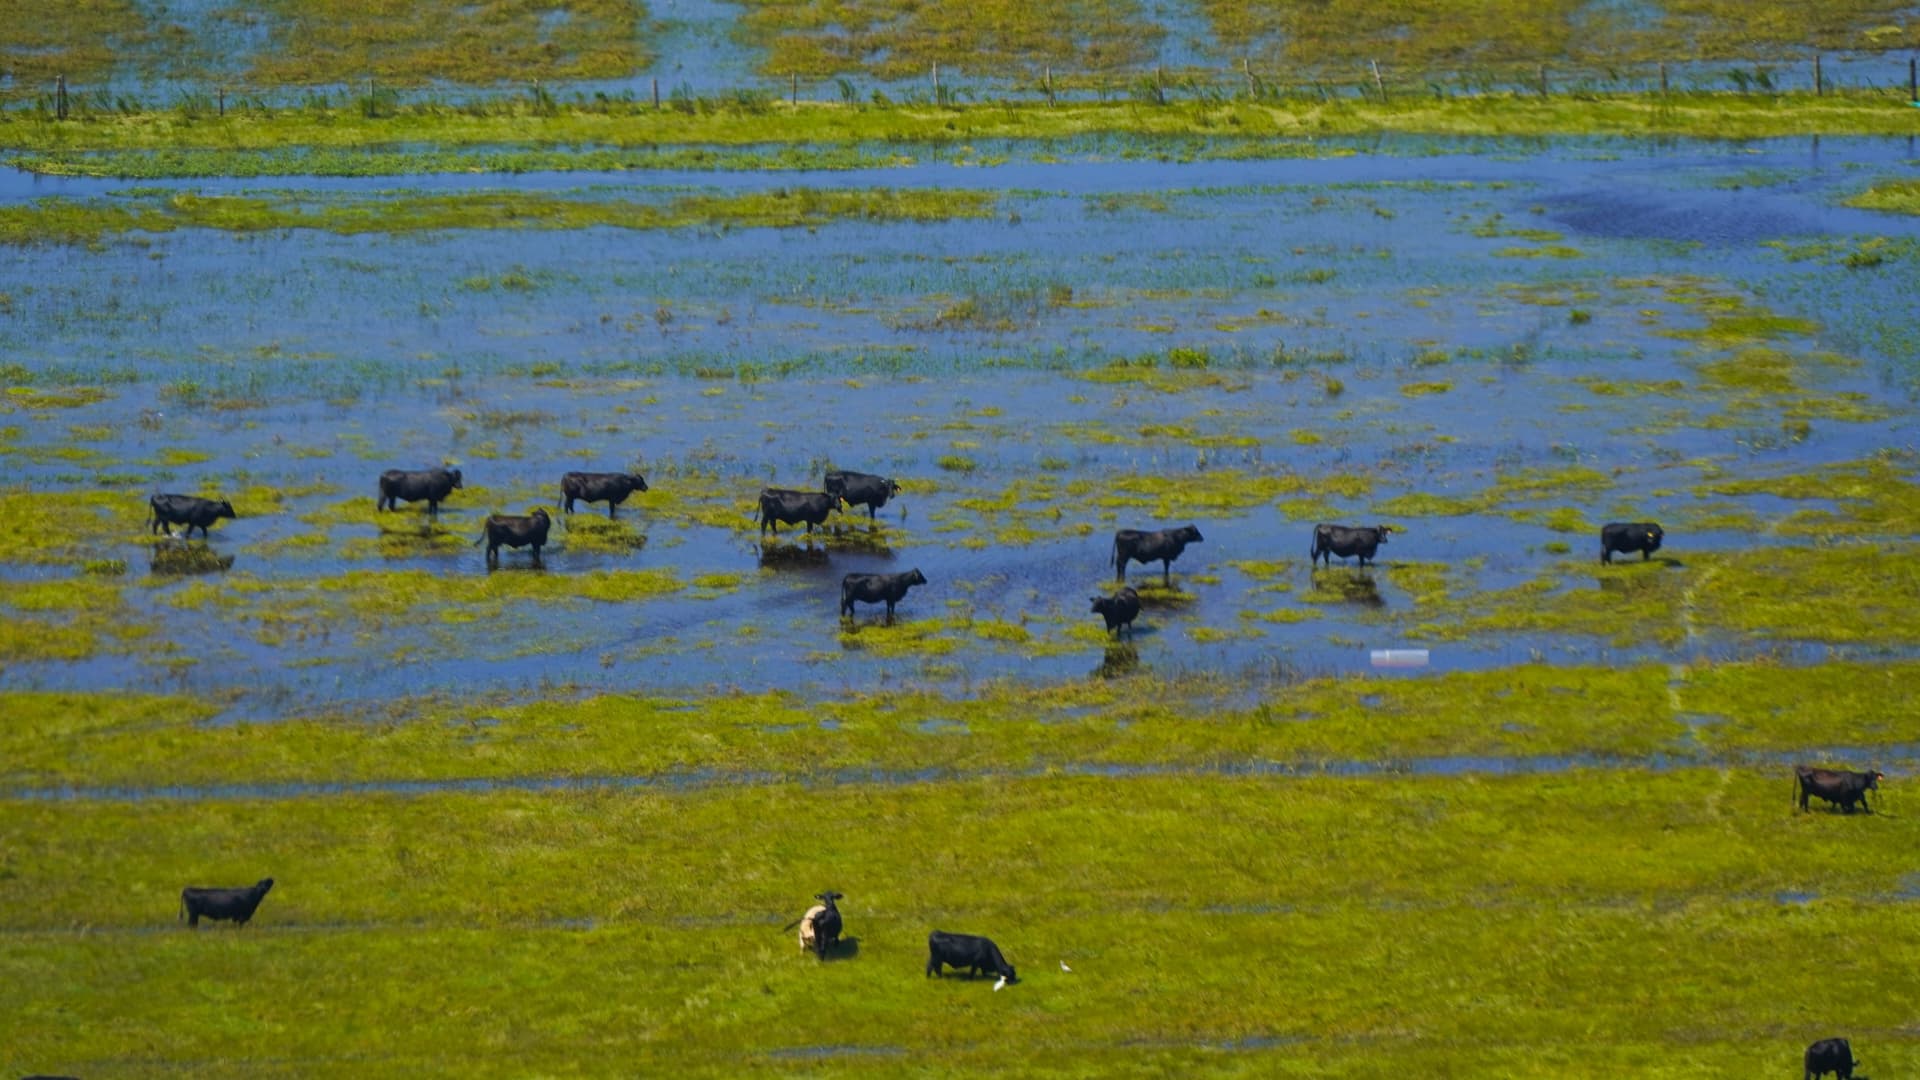 Livestock move in a flooded field in the aftermath of Hurricane Ian, Thursday, Sept. 29, 2022, on Sanibel Island, Fla.